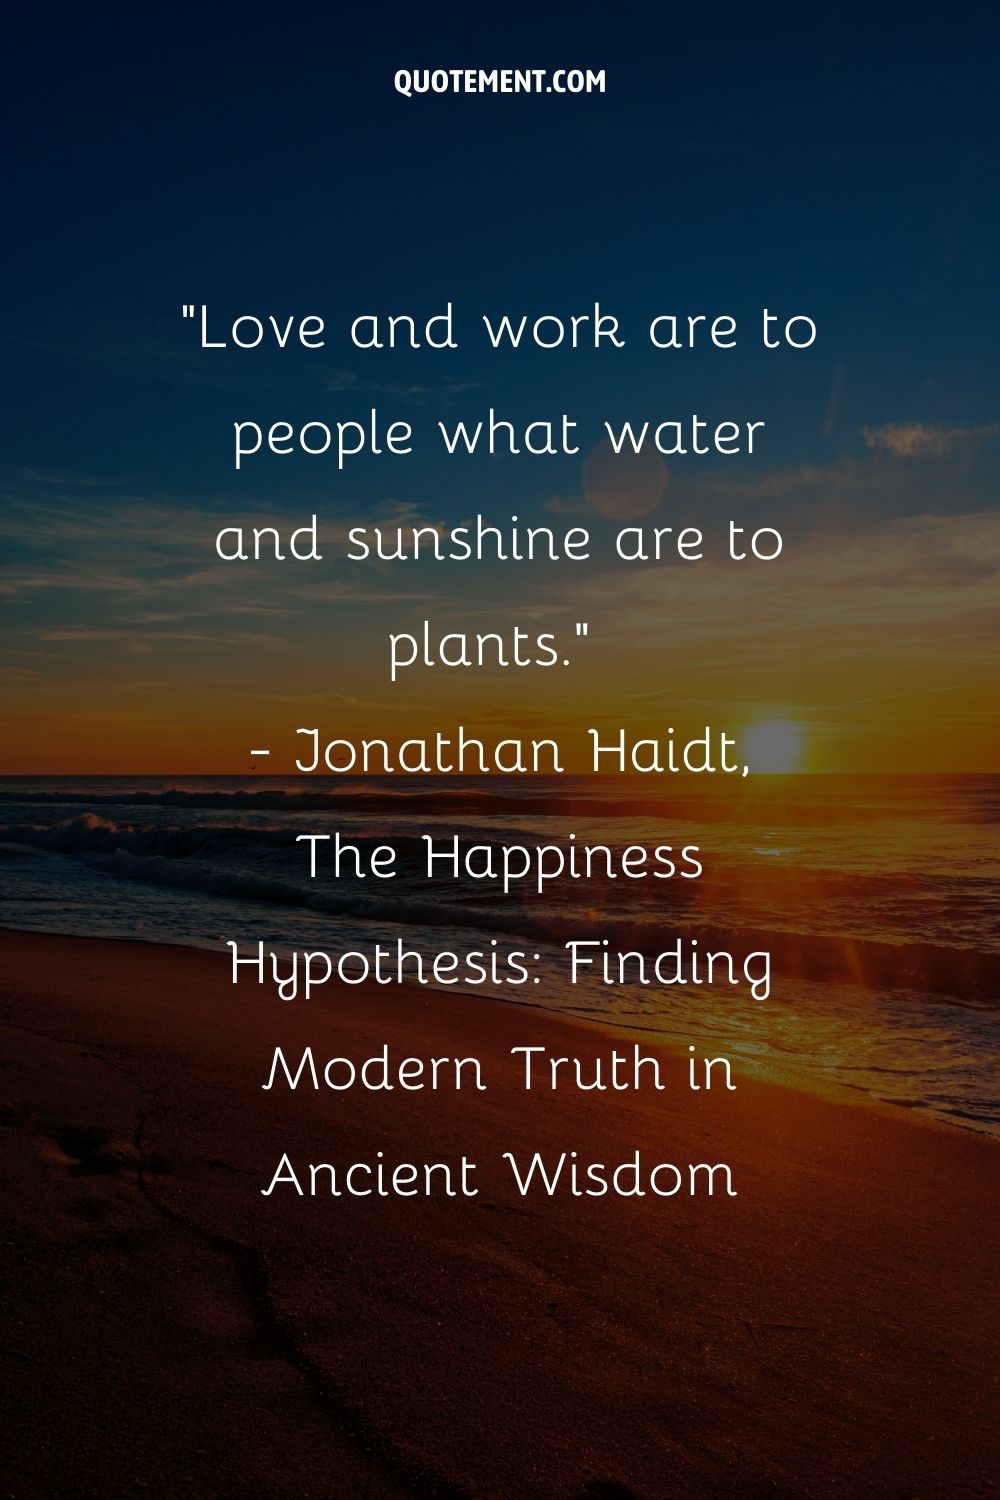 Love and work are to people what water and sunshine are to plants